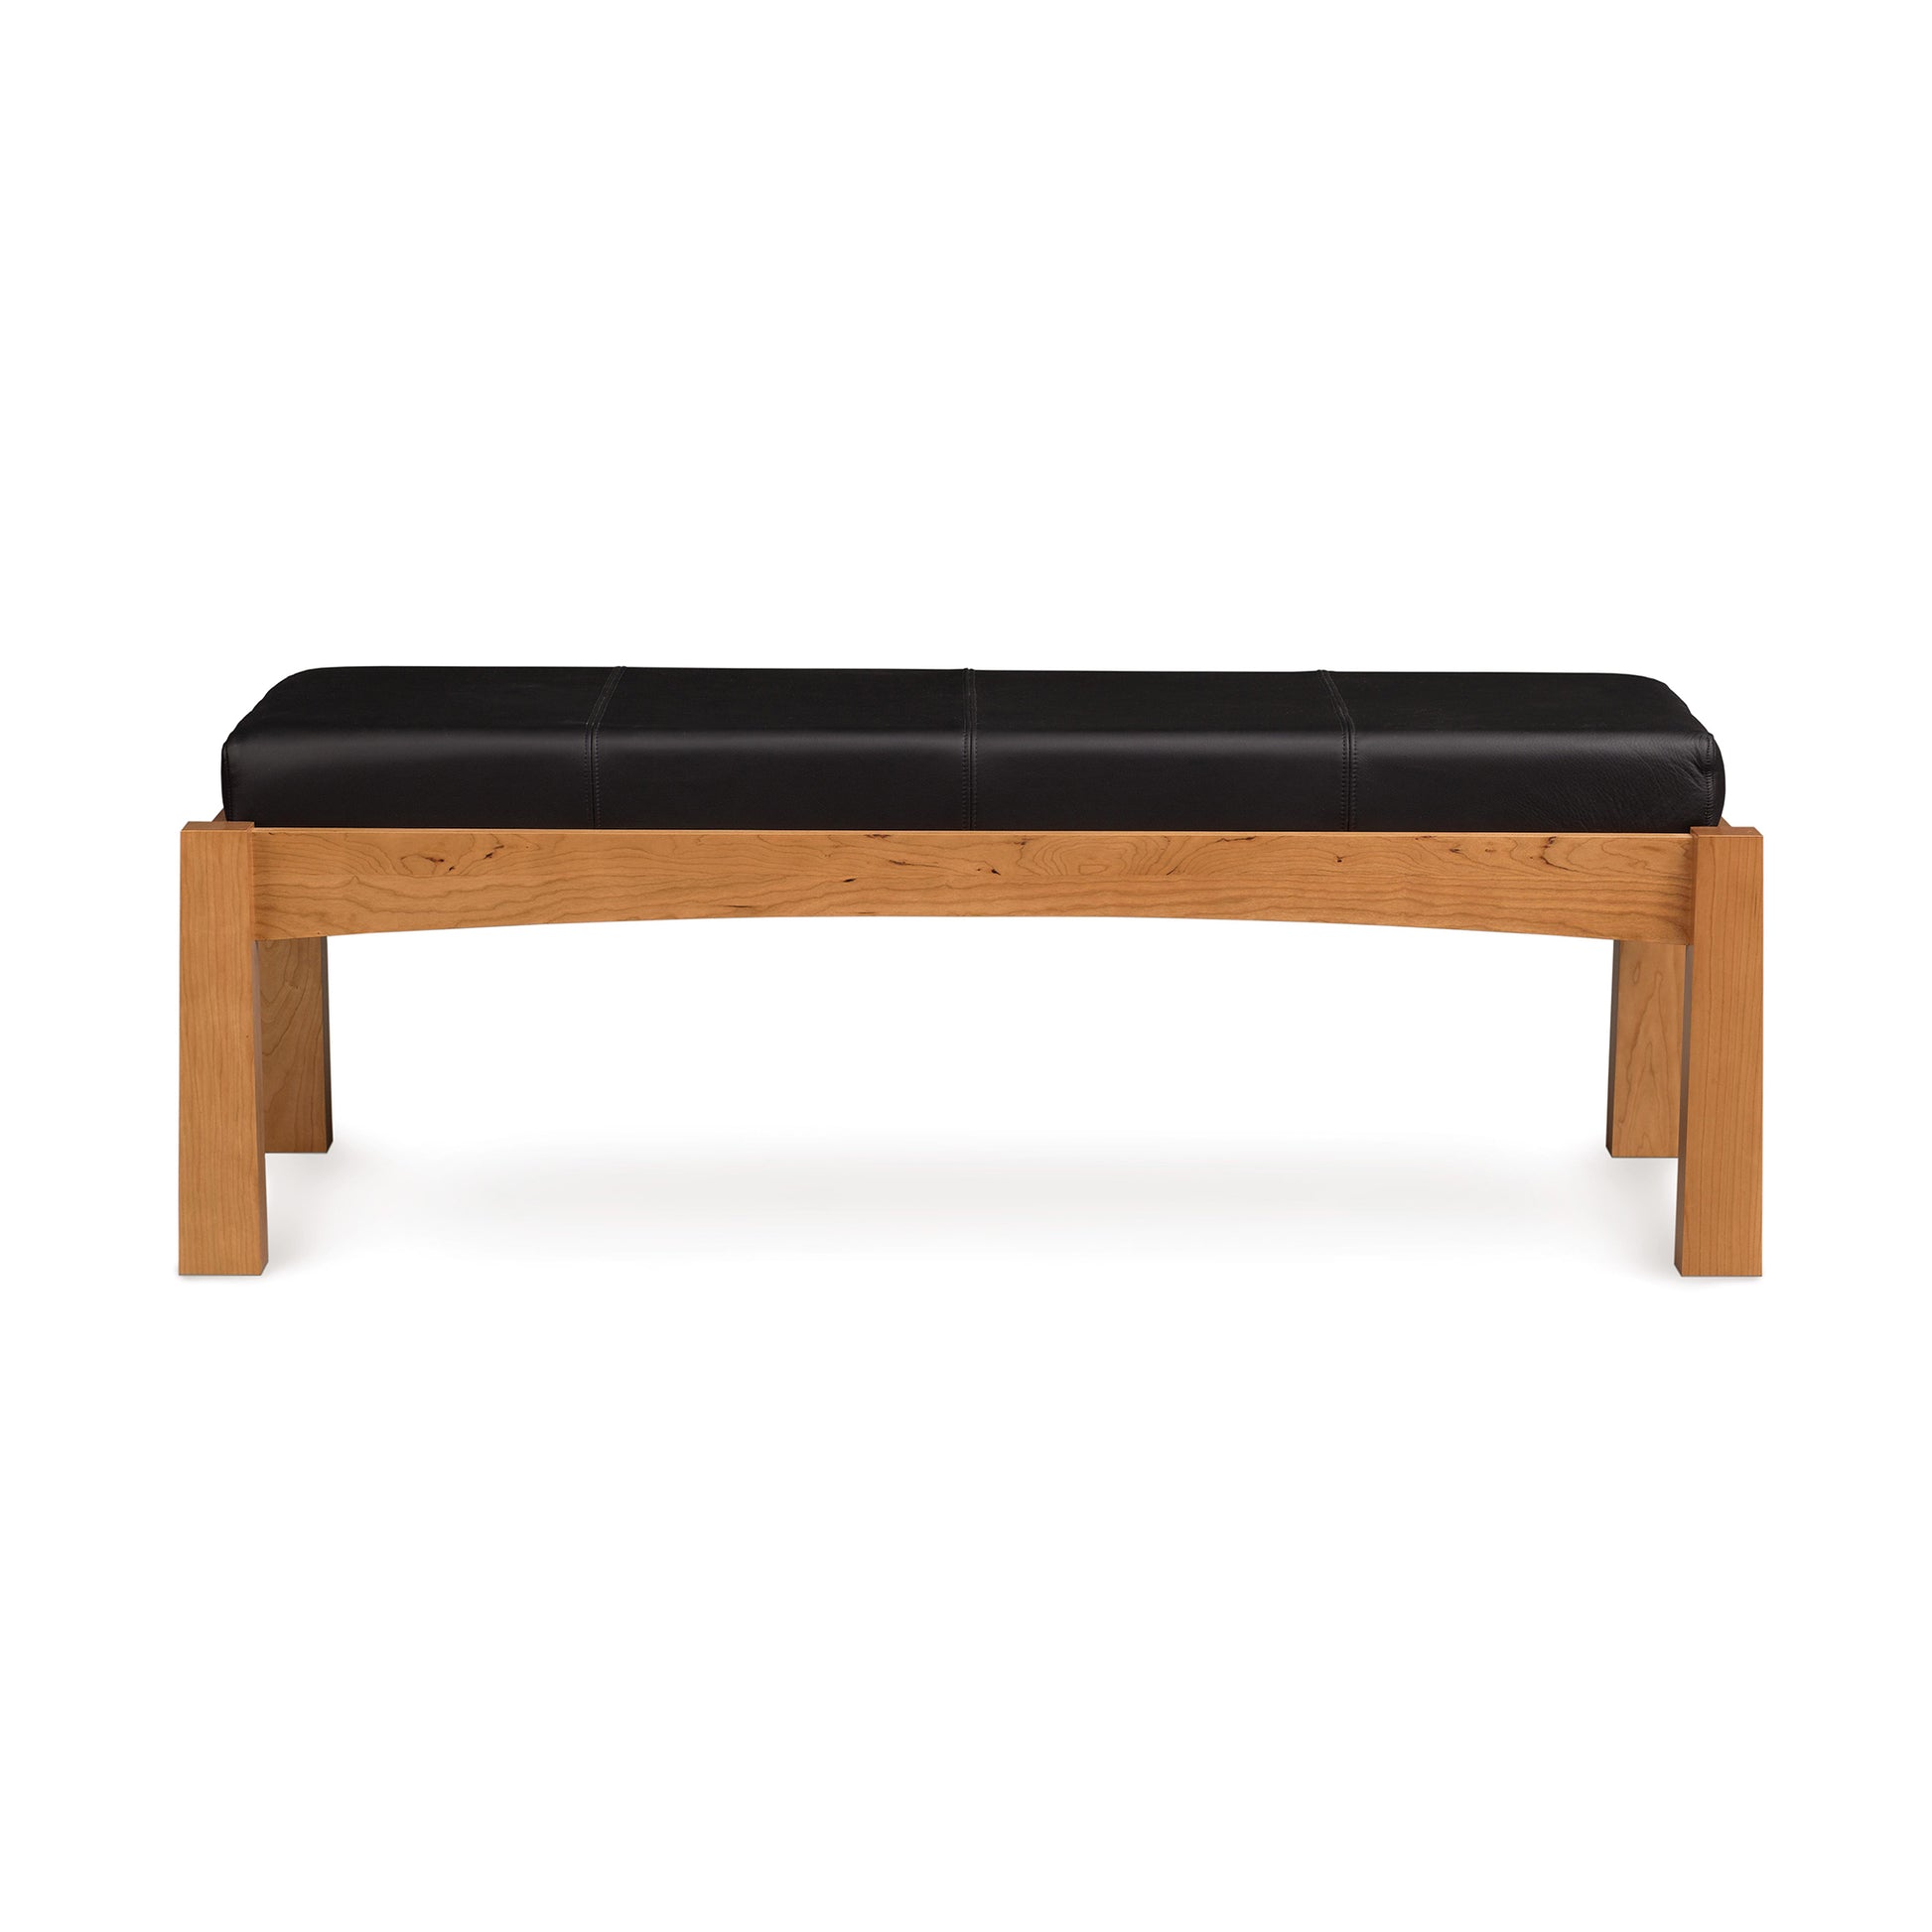 A modern Berkeley Upholstered Bench in cherry wood with a black leather seat, isolated on a white background by Copeland Furniture.